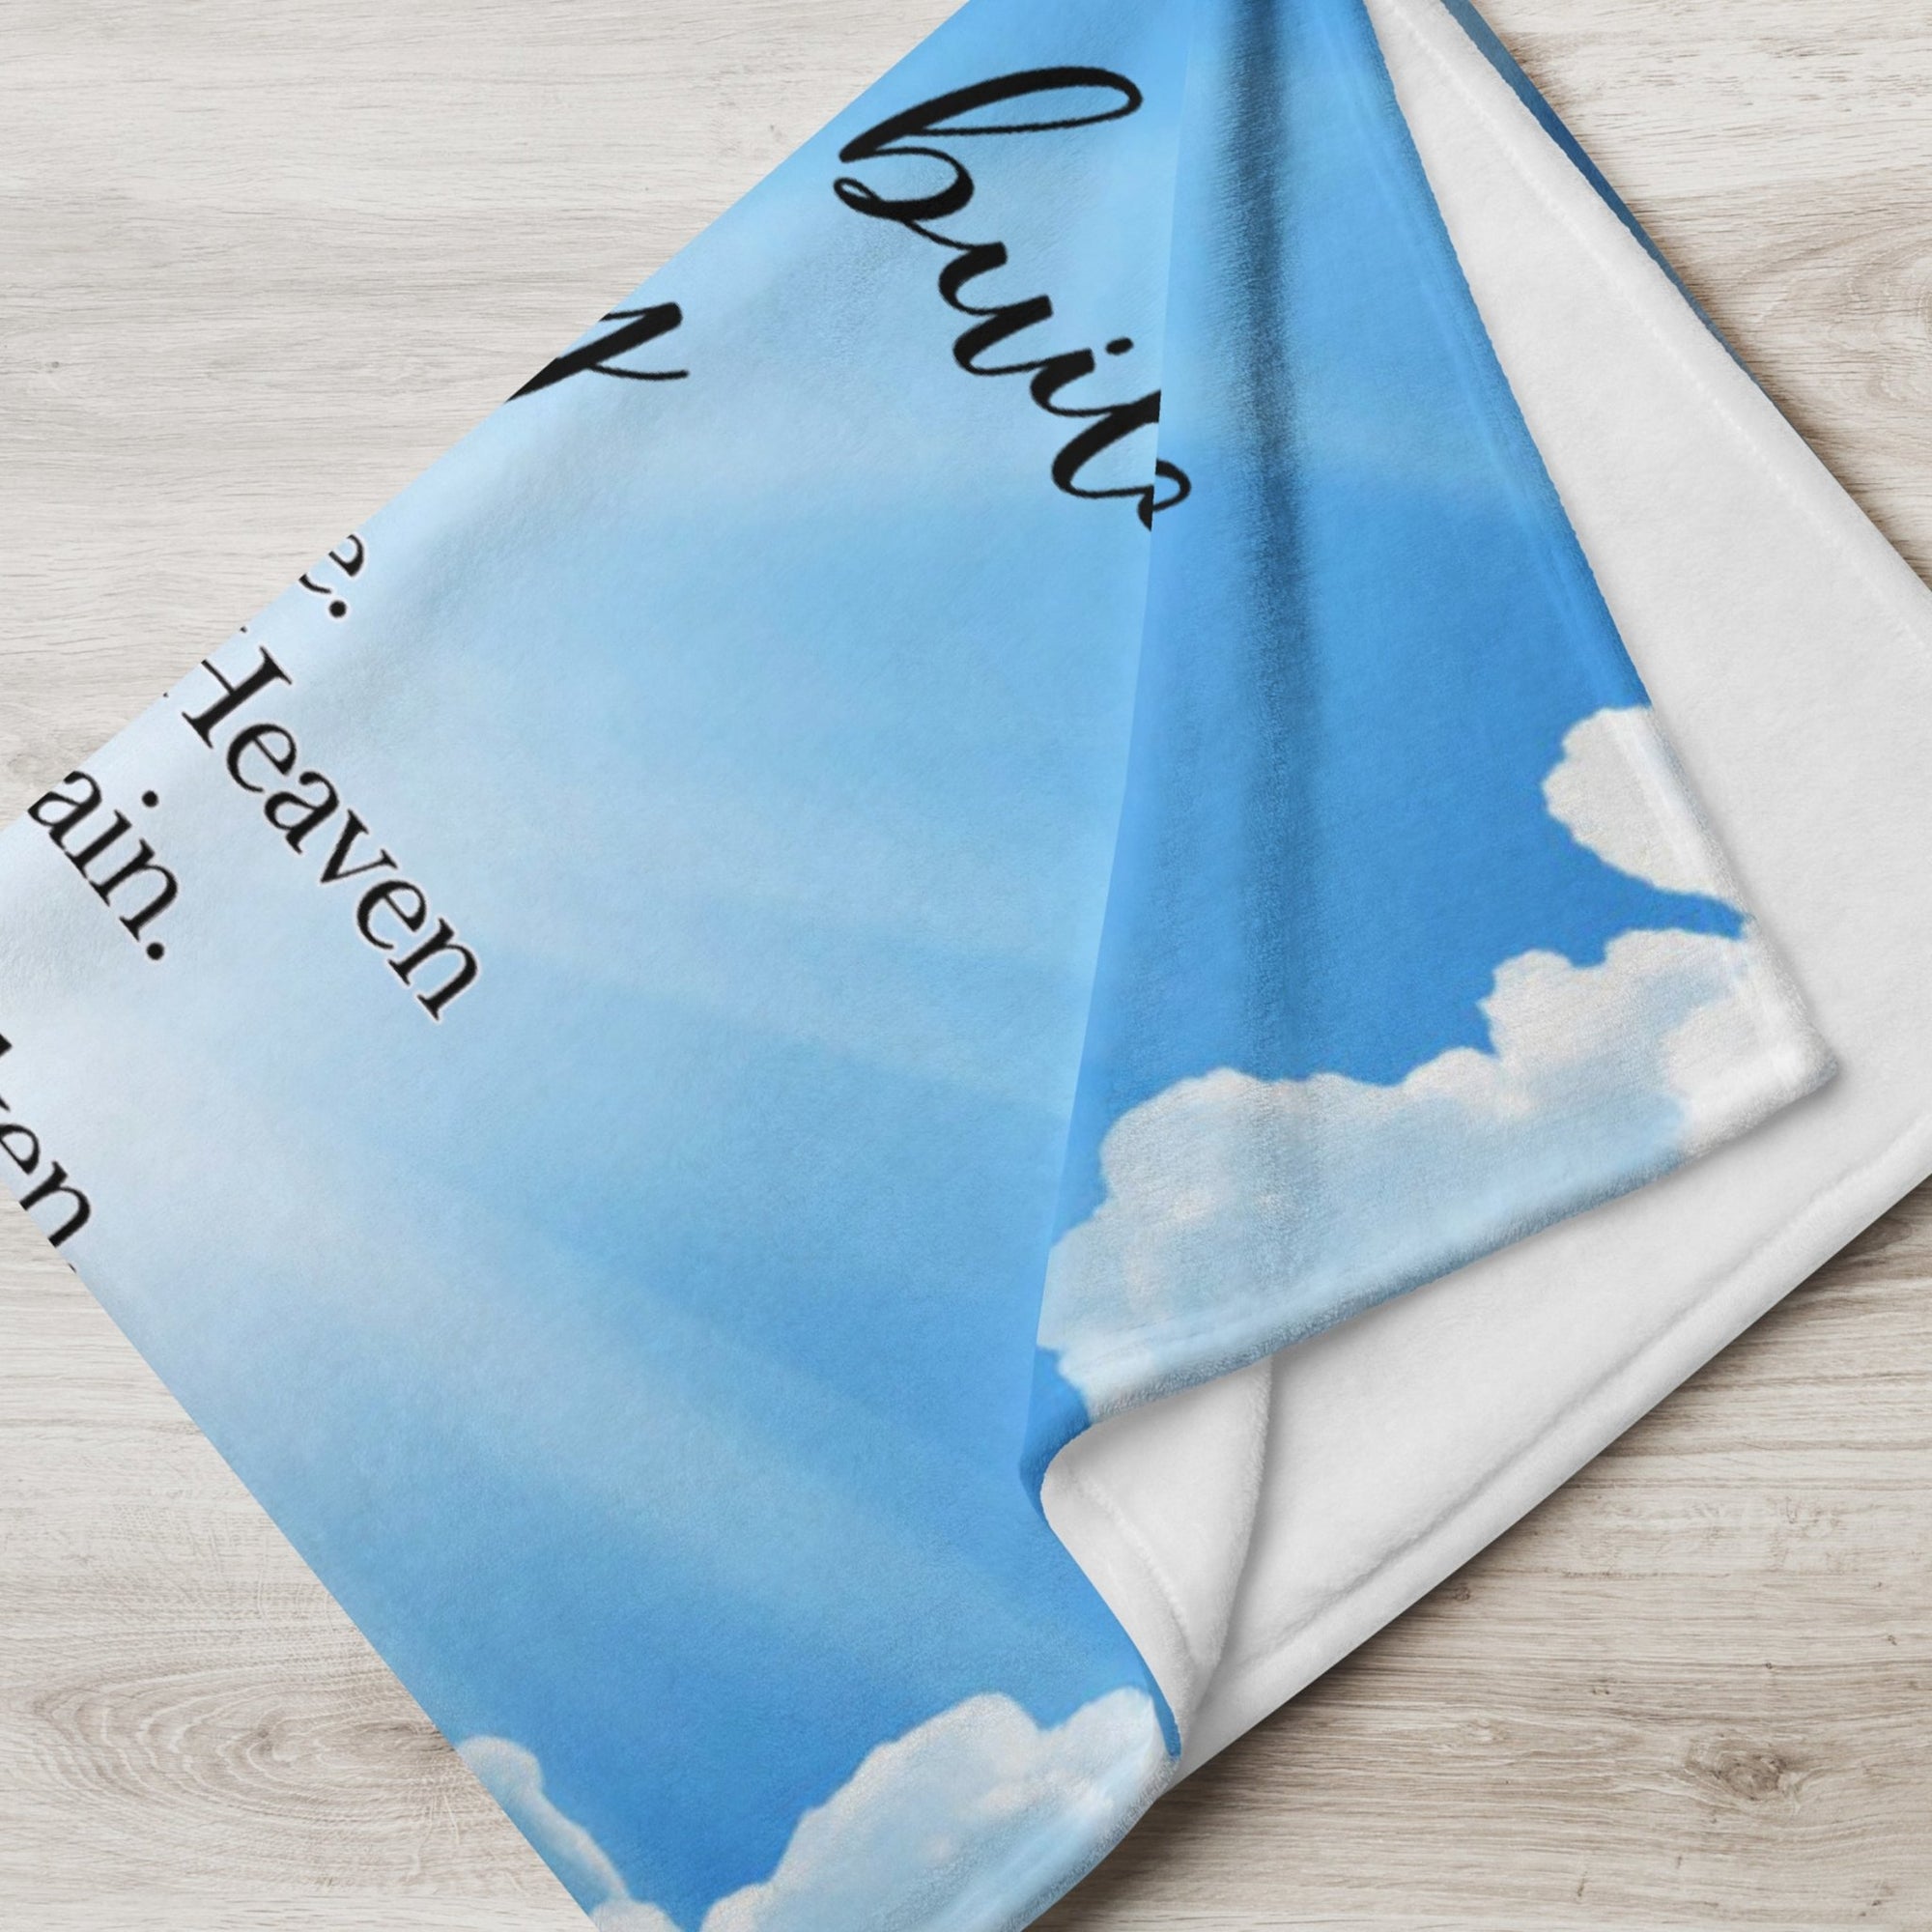 Memorial Decorative Throw Blanket Sympathy Gift For Home Décor Ideas - If Tears Could Build a Stairway to Heaven (Heaven)